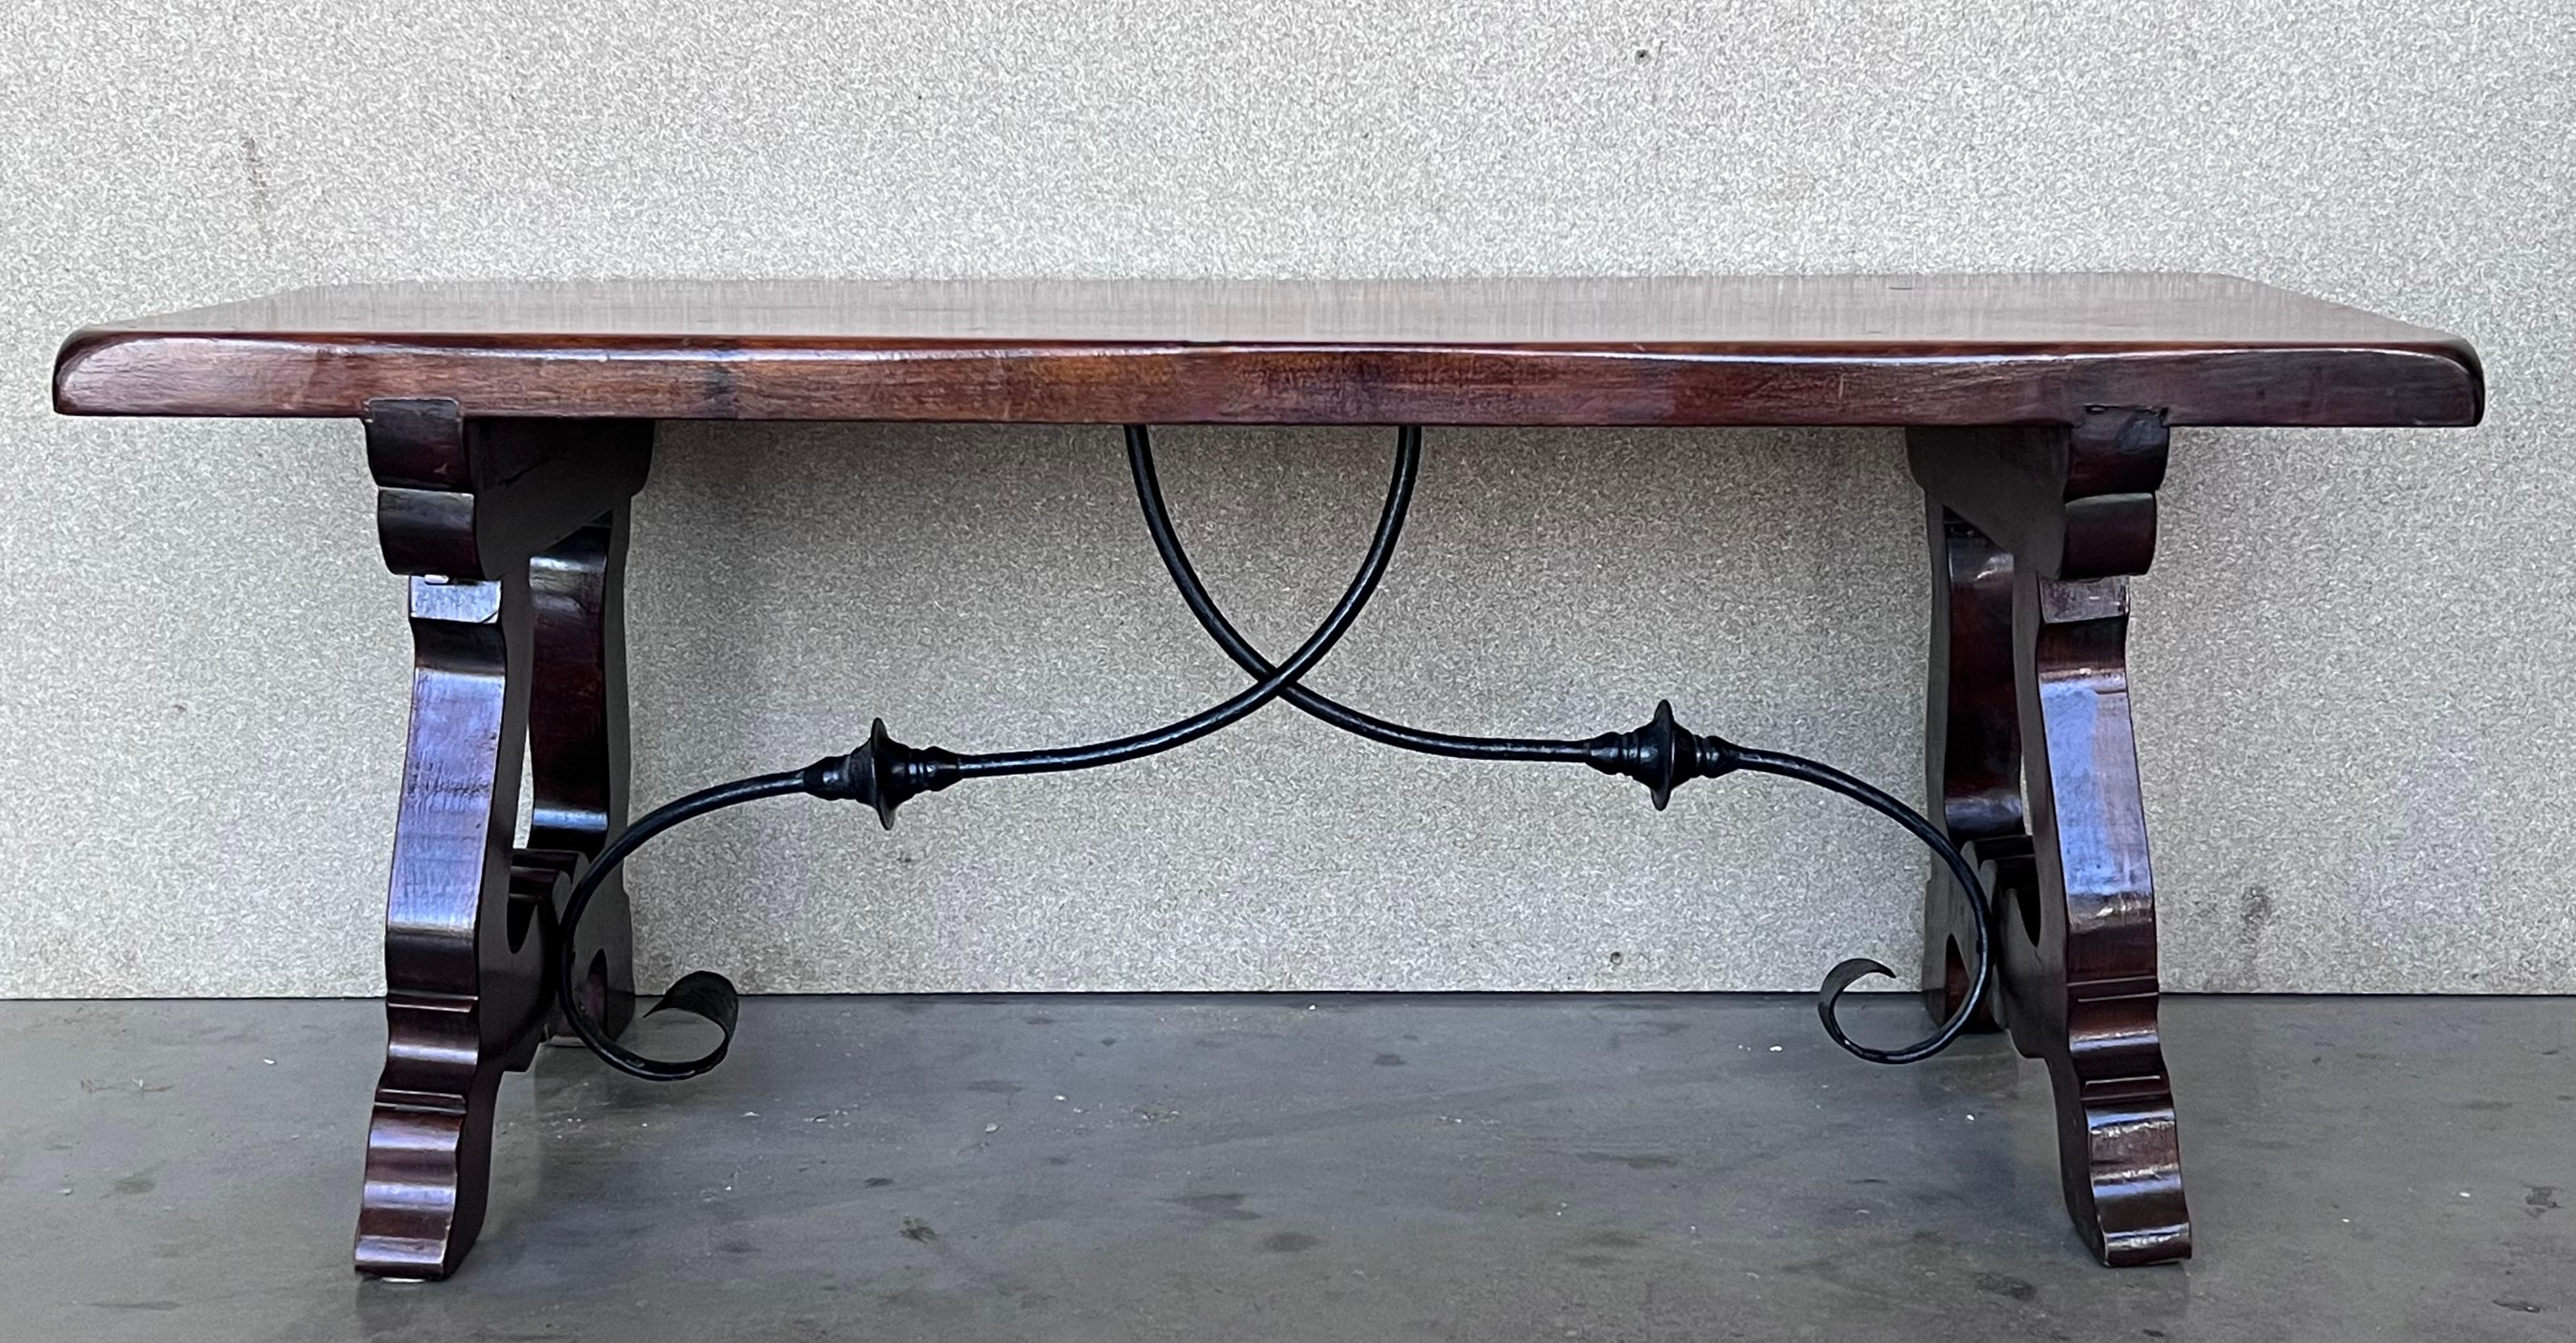 20th Century Spanish farm table with wood columns stretchers and beautiful top.

An unusual form with nice shiny patina. Nice size for a side or end table, or as a lamp table. Graceful carved drawers. Highly decorative.

Completely restored.